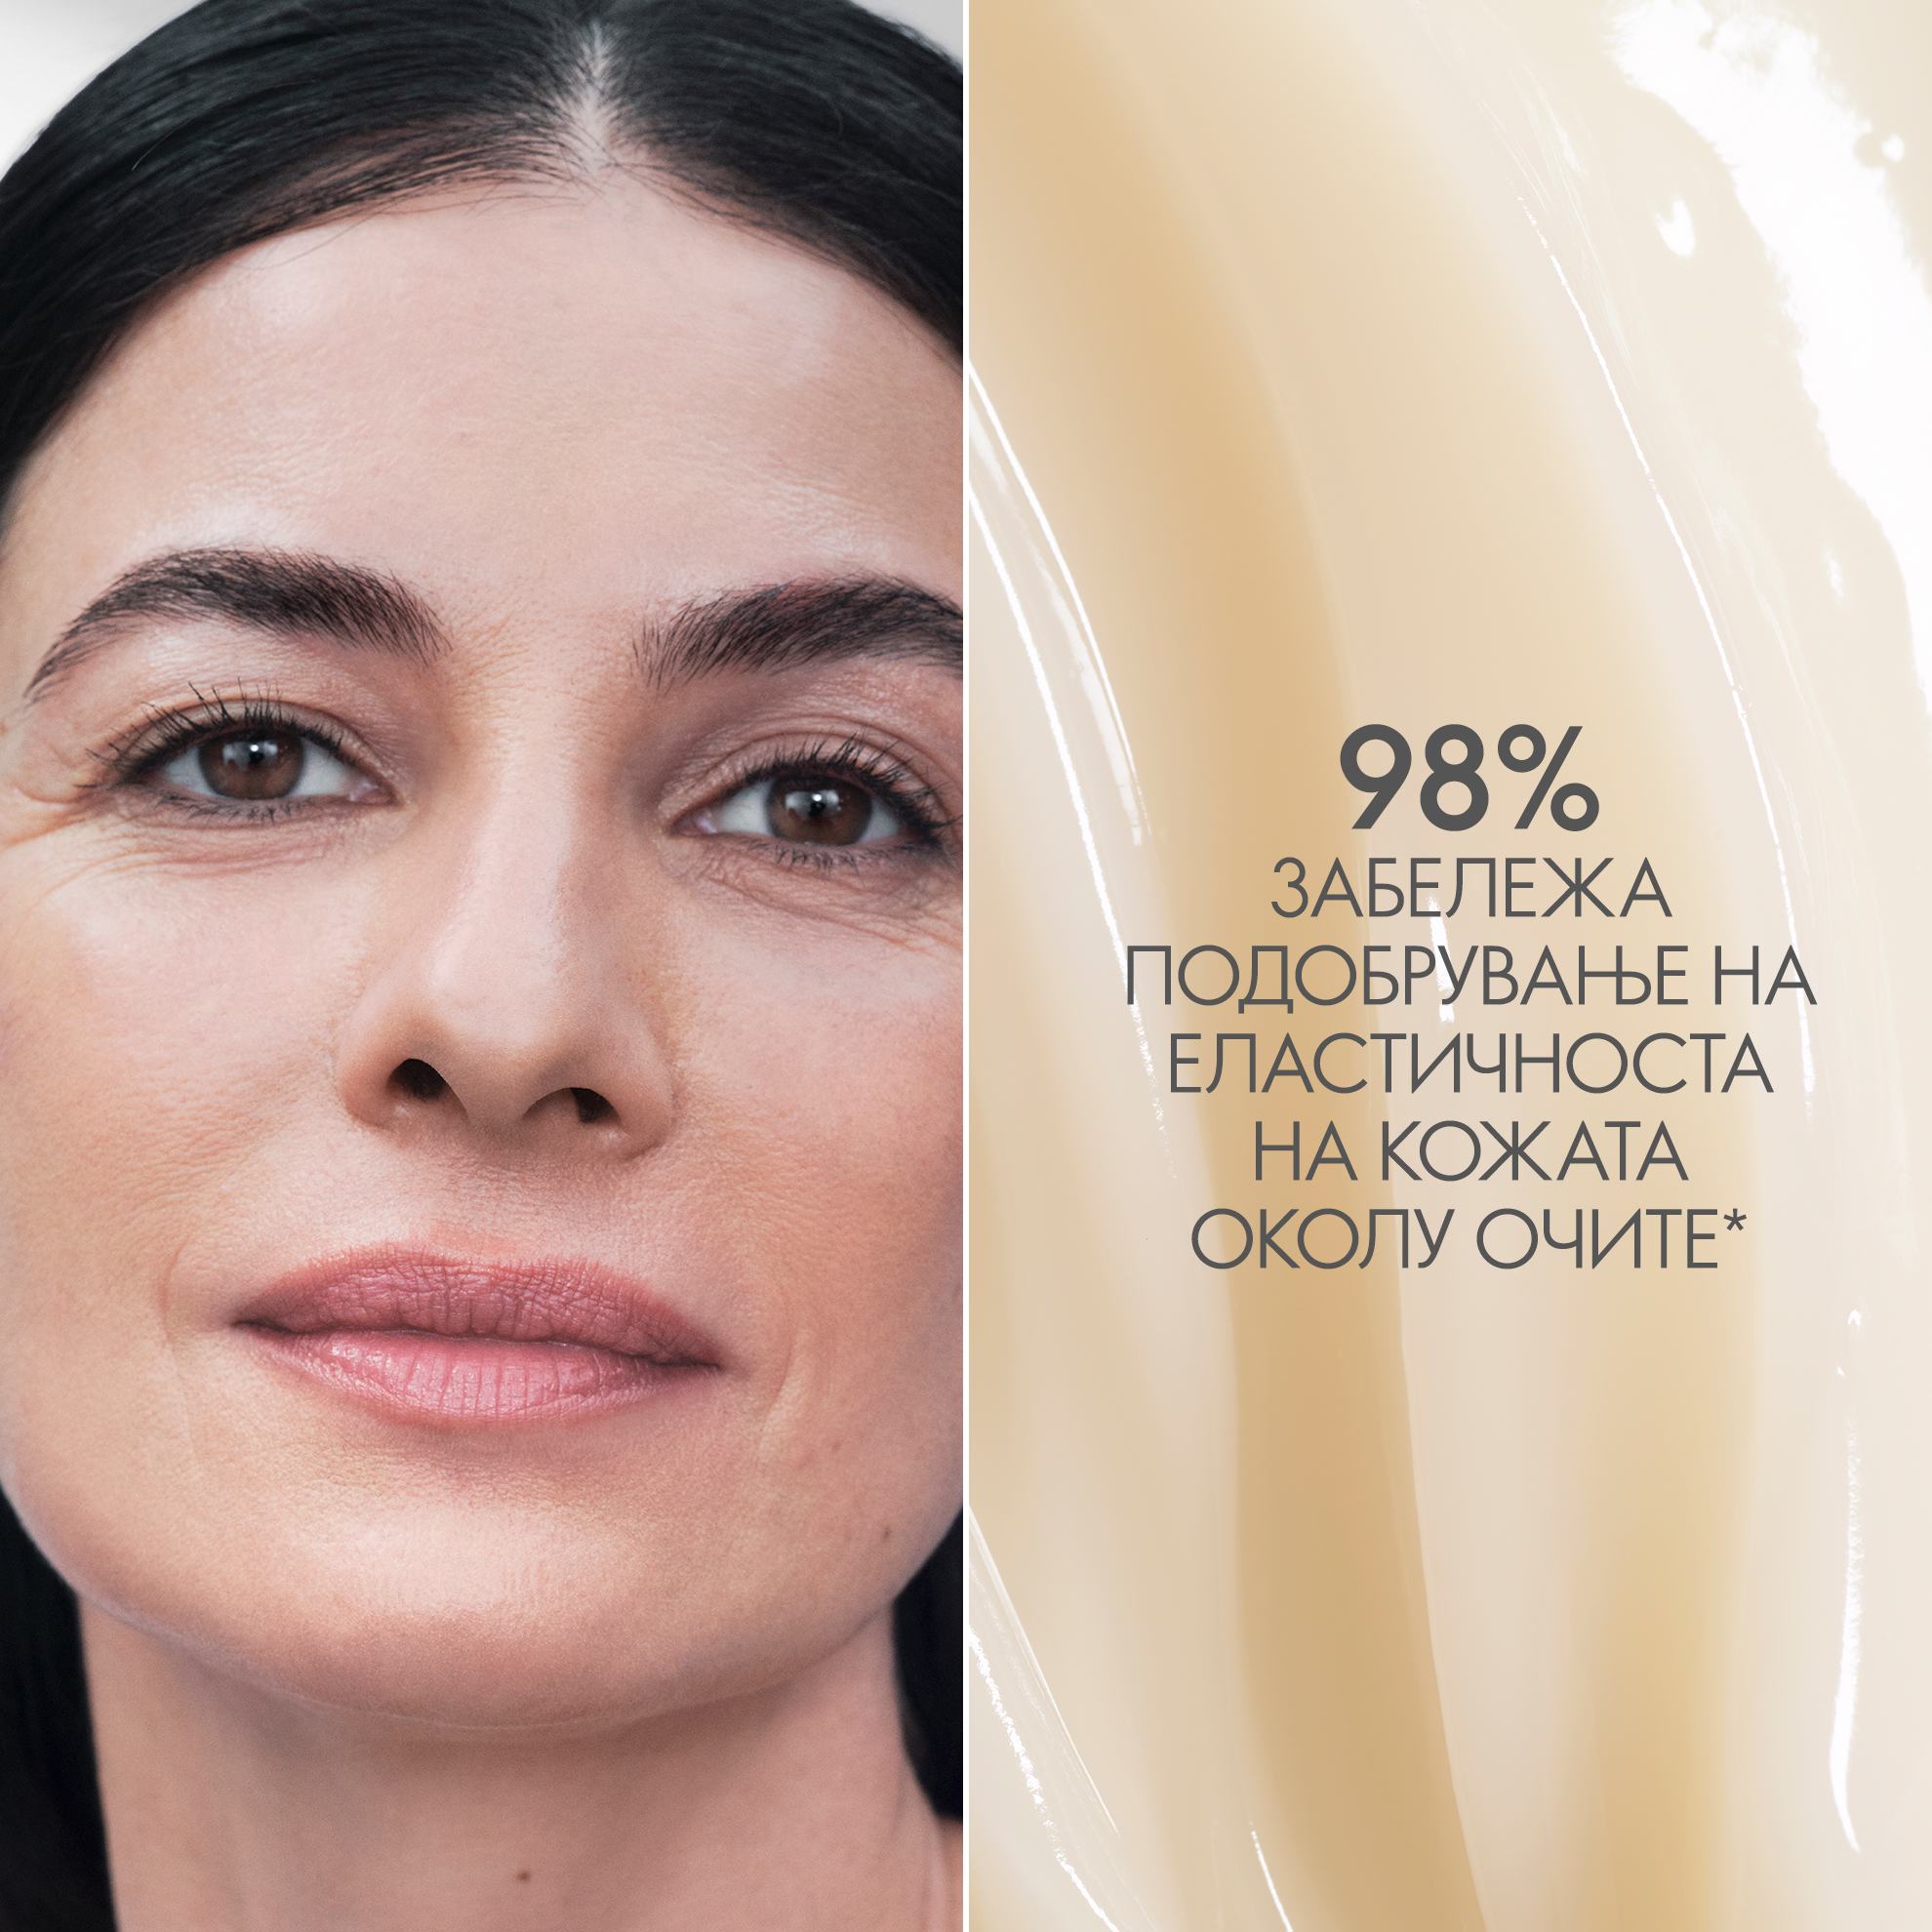 https://media-cdn.oriflame.com/productImage?externalMediaId=product-management-media%2fProducts%2f42425%2fMK%2f42425_2.png&id=17583843&version=2